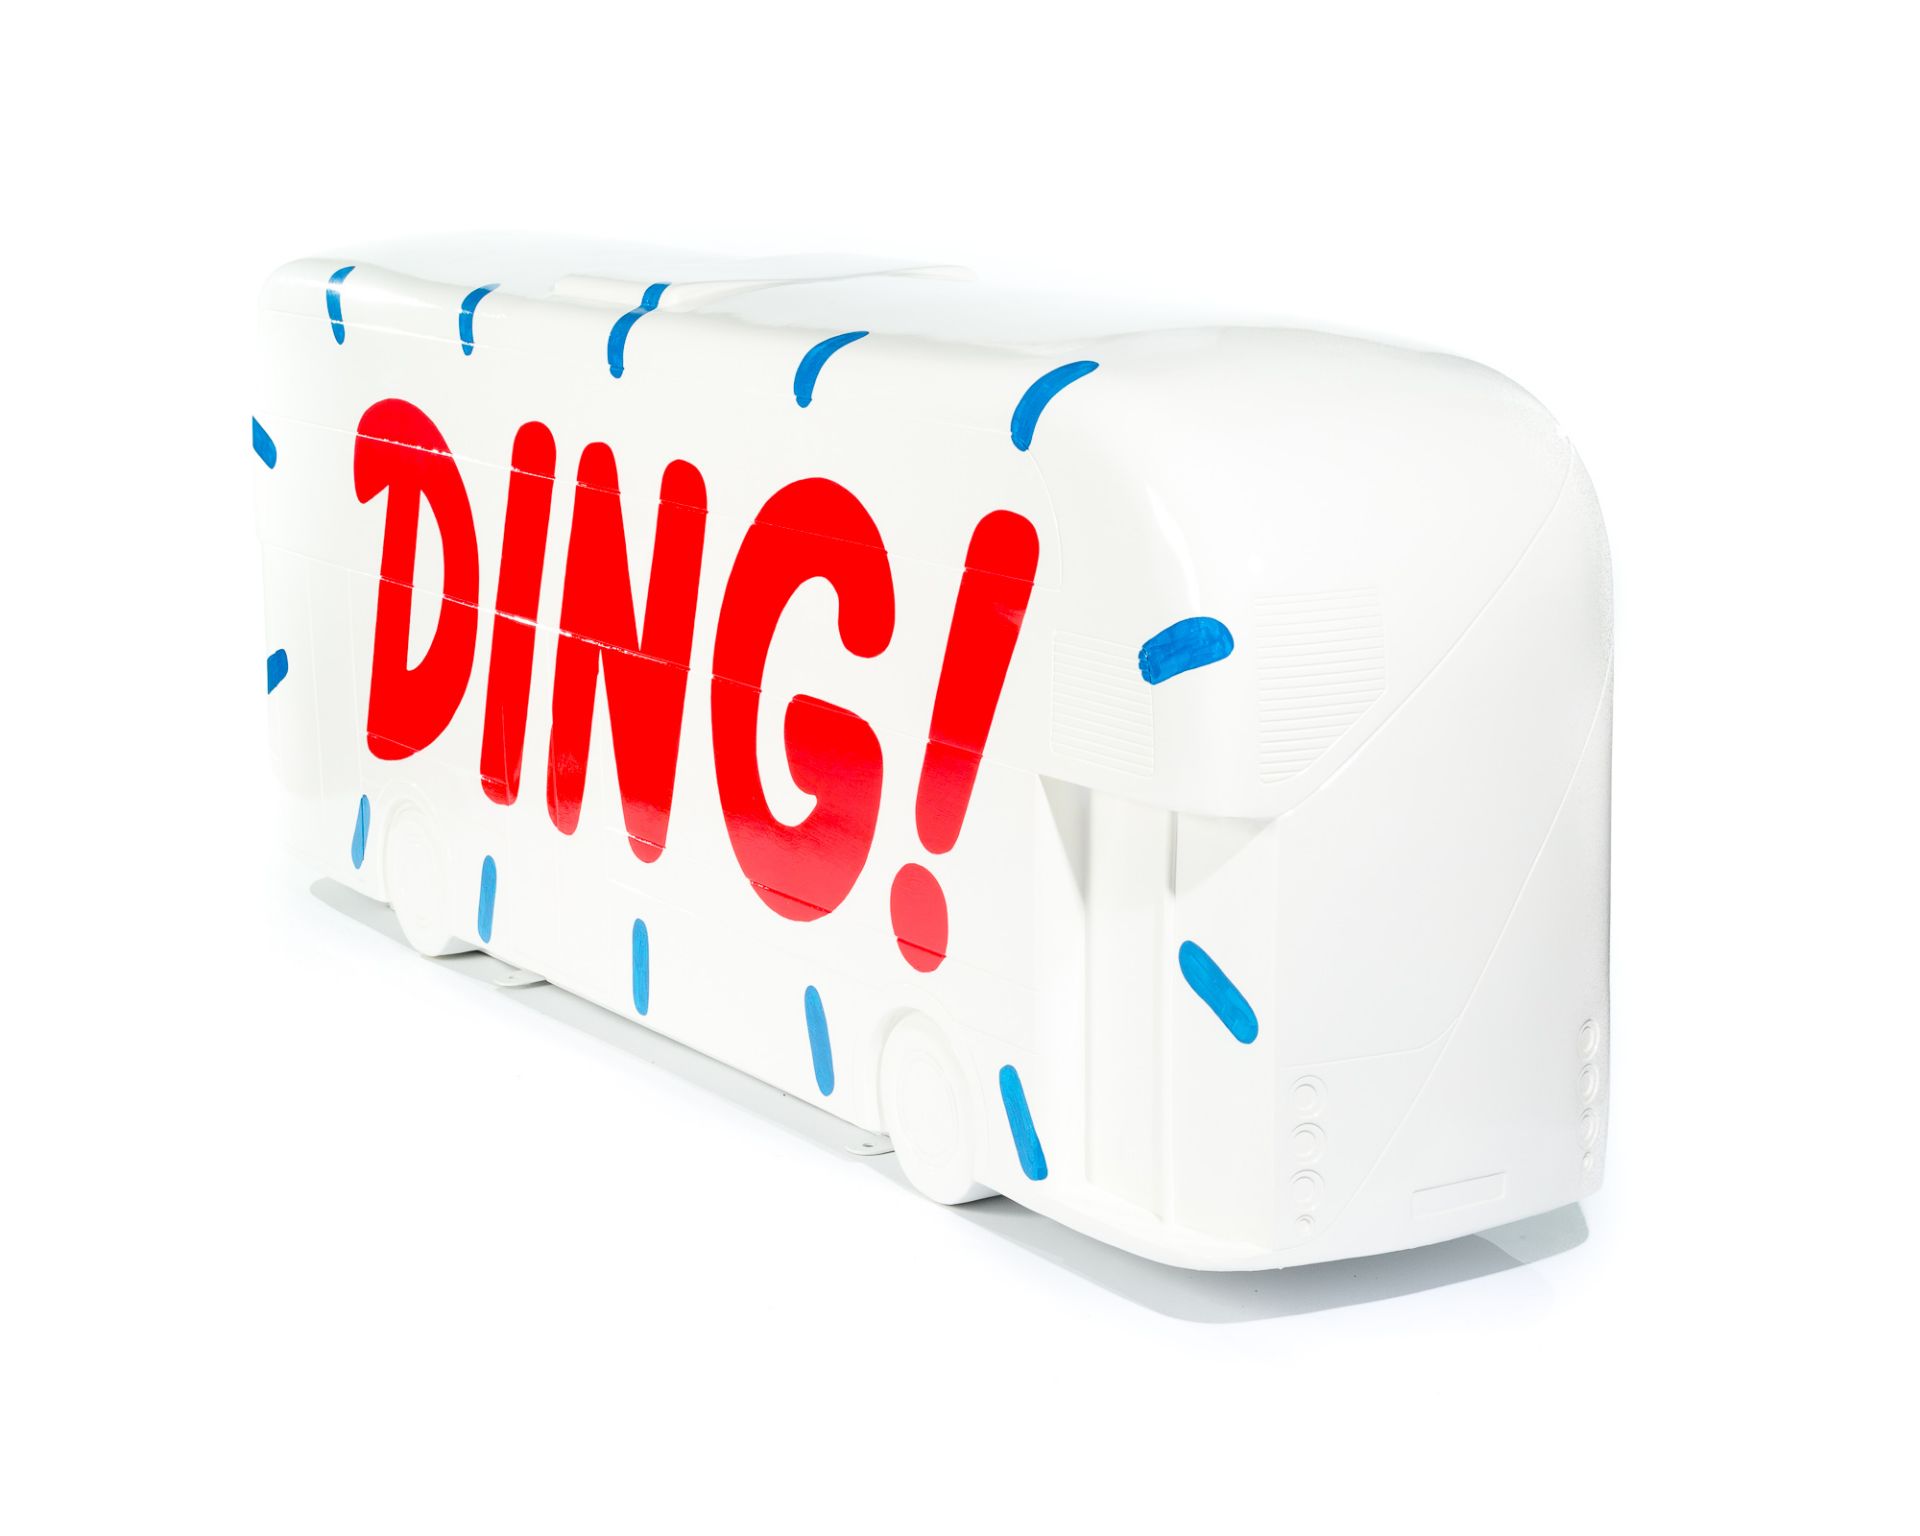 Artist: Crispin Finn  Design: Ding! Ding!    About the design   Crispin Finn is London based duo - Image 2 of 3